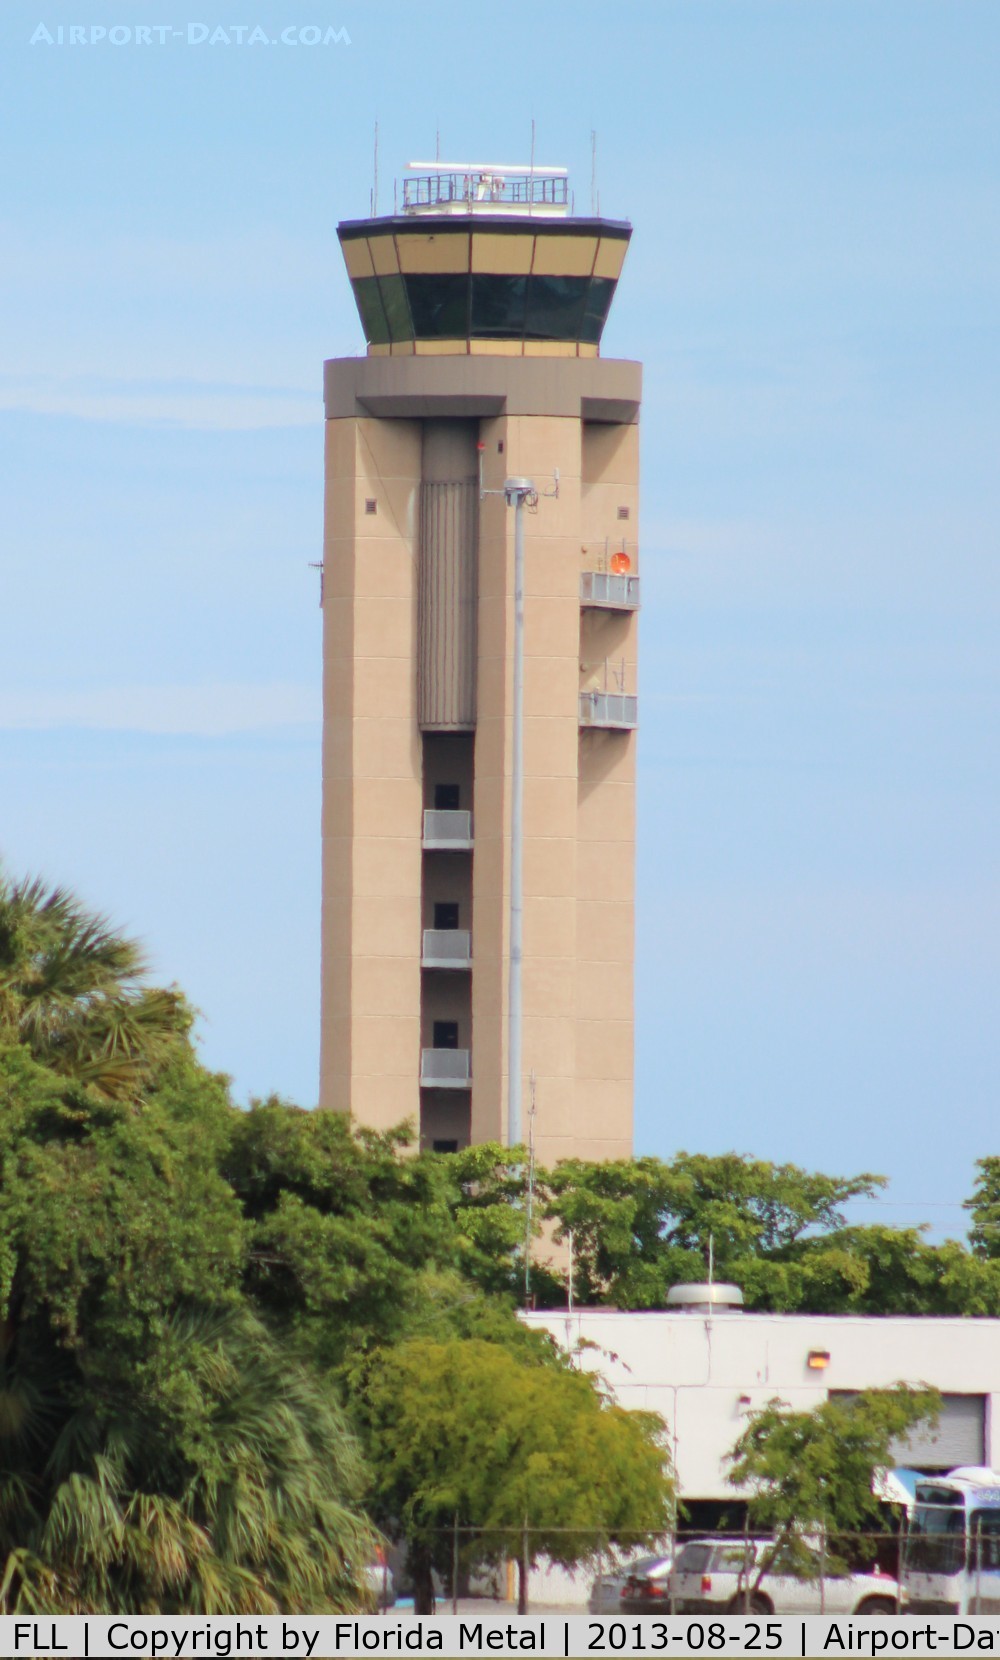 Fort Lauderdale/hollywood International Airport (FLL) - Ft. Lauderdale tower